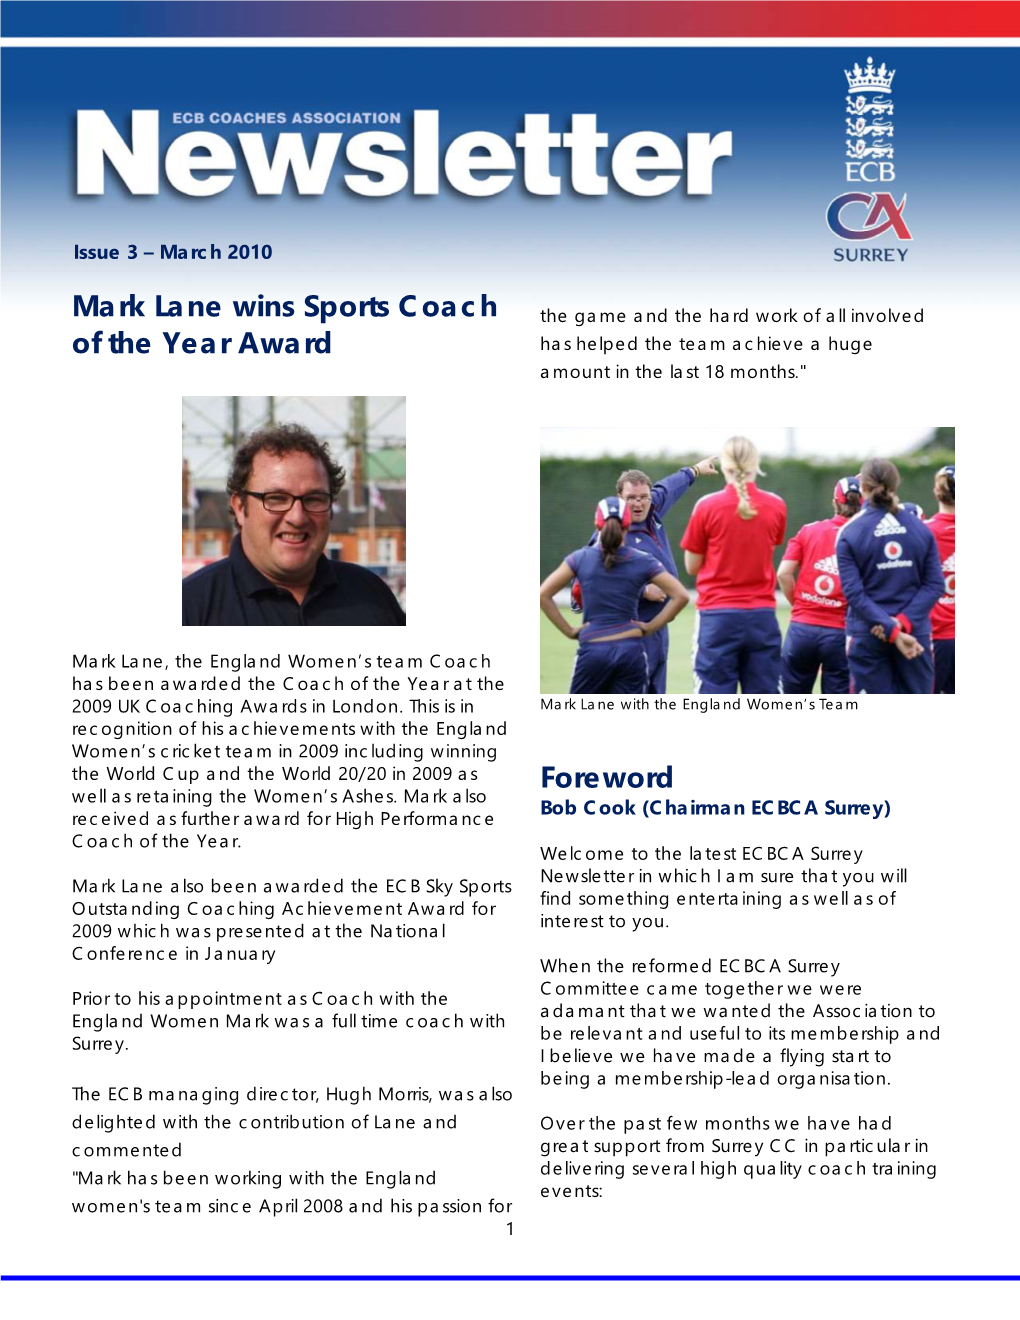 Foreword Mark Lane Wins Sports Coach of the Year Award